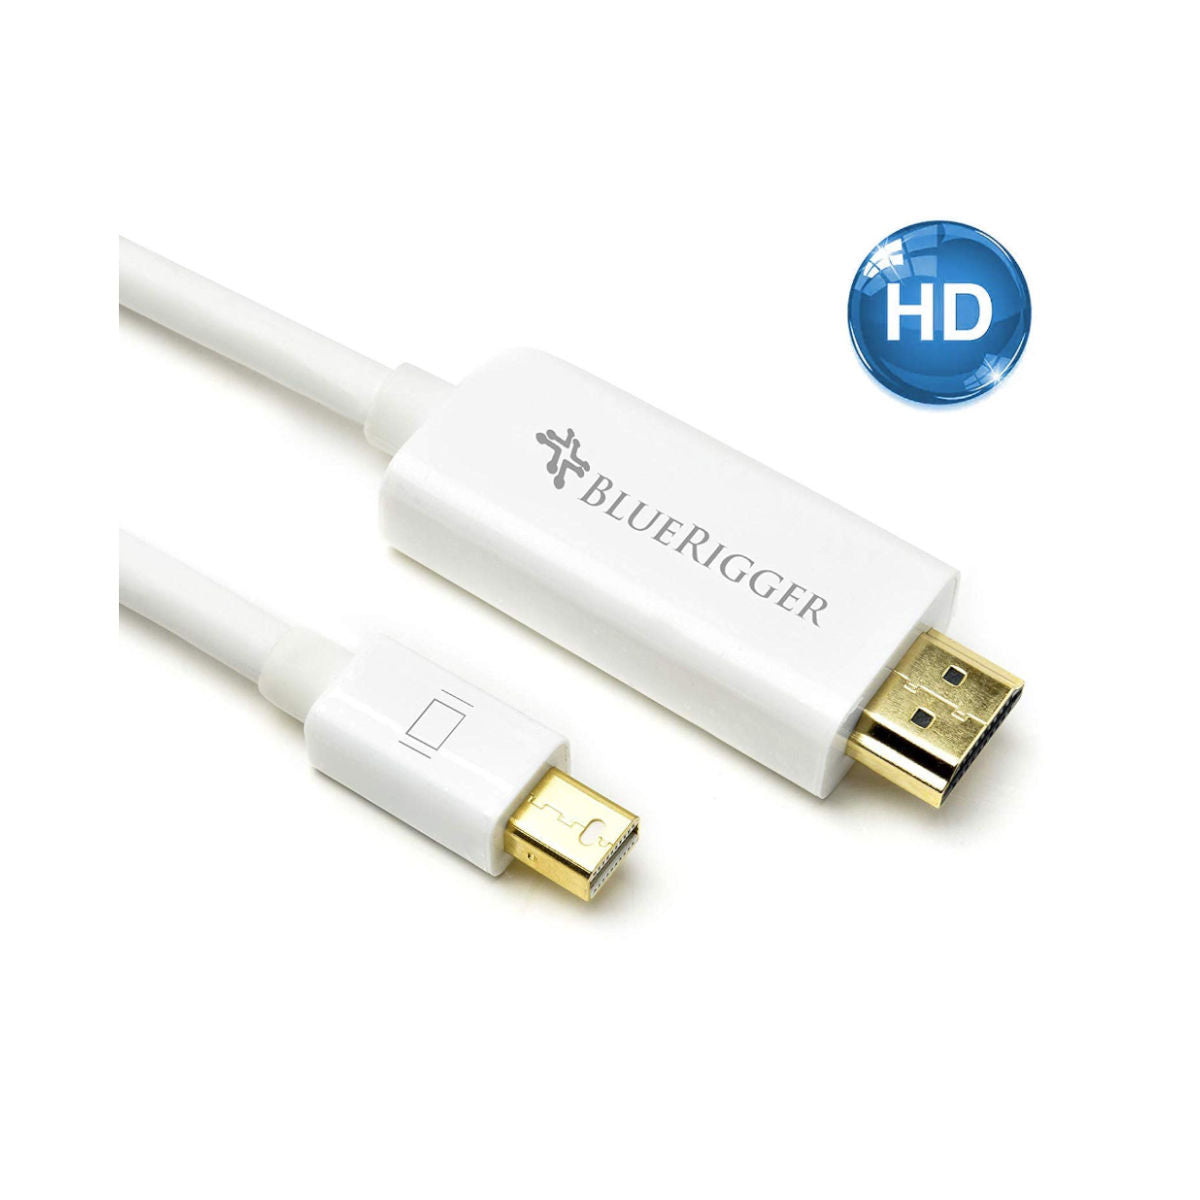 BlueRigger Mini DisplayPort (DP) to HDMI Cable (15 ft /4.57mtrs) - Ooberpad